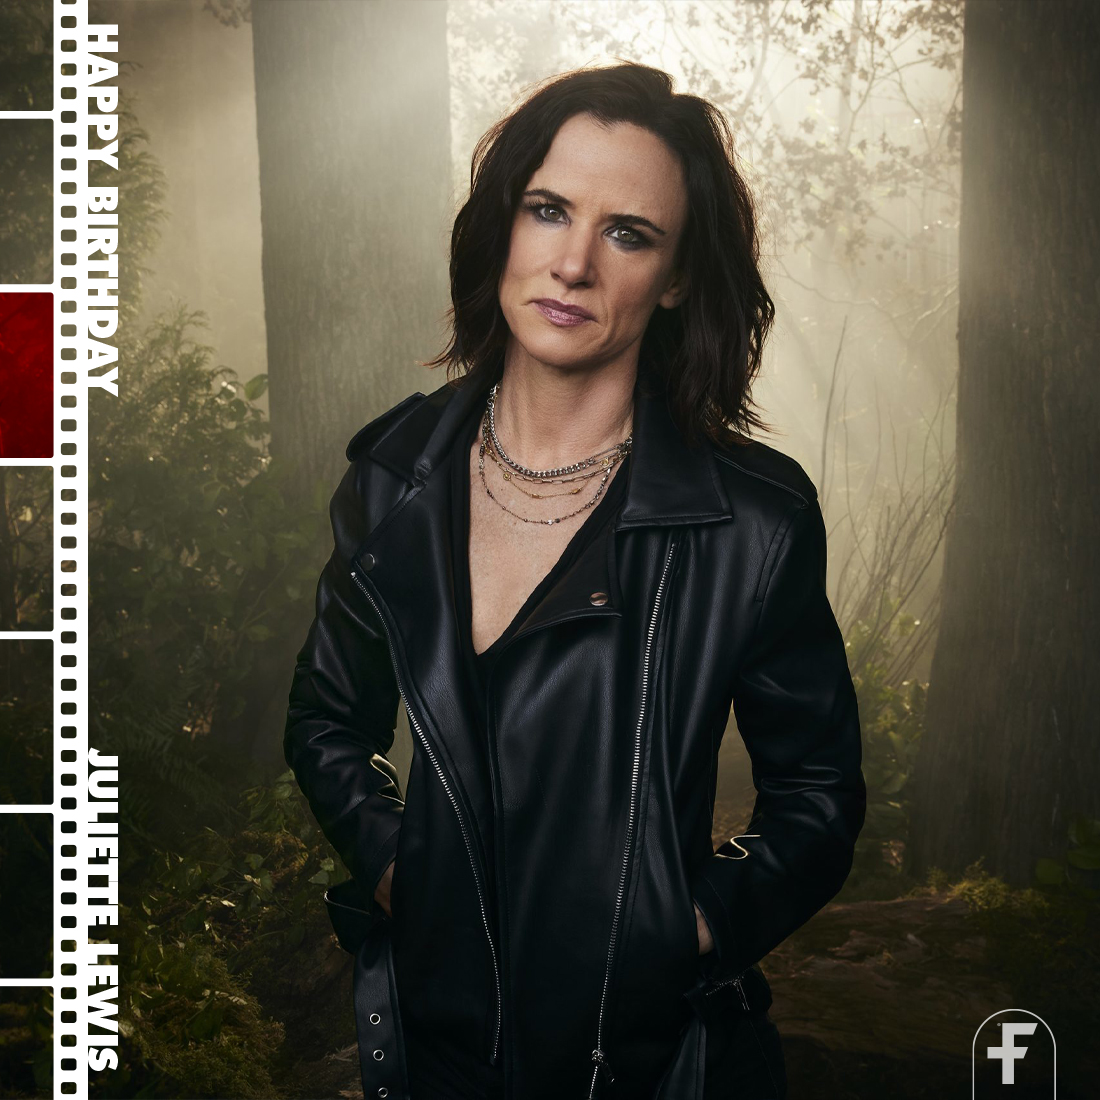 Happy birthday to Juliette Lewis! Known by genre fans for her work in FROM DUSK TILL DAWN, CAPE FEAR, NATURAL BORN KILLERS, MA, and YELLOWJACKETS.